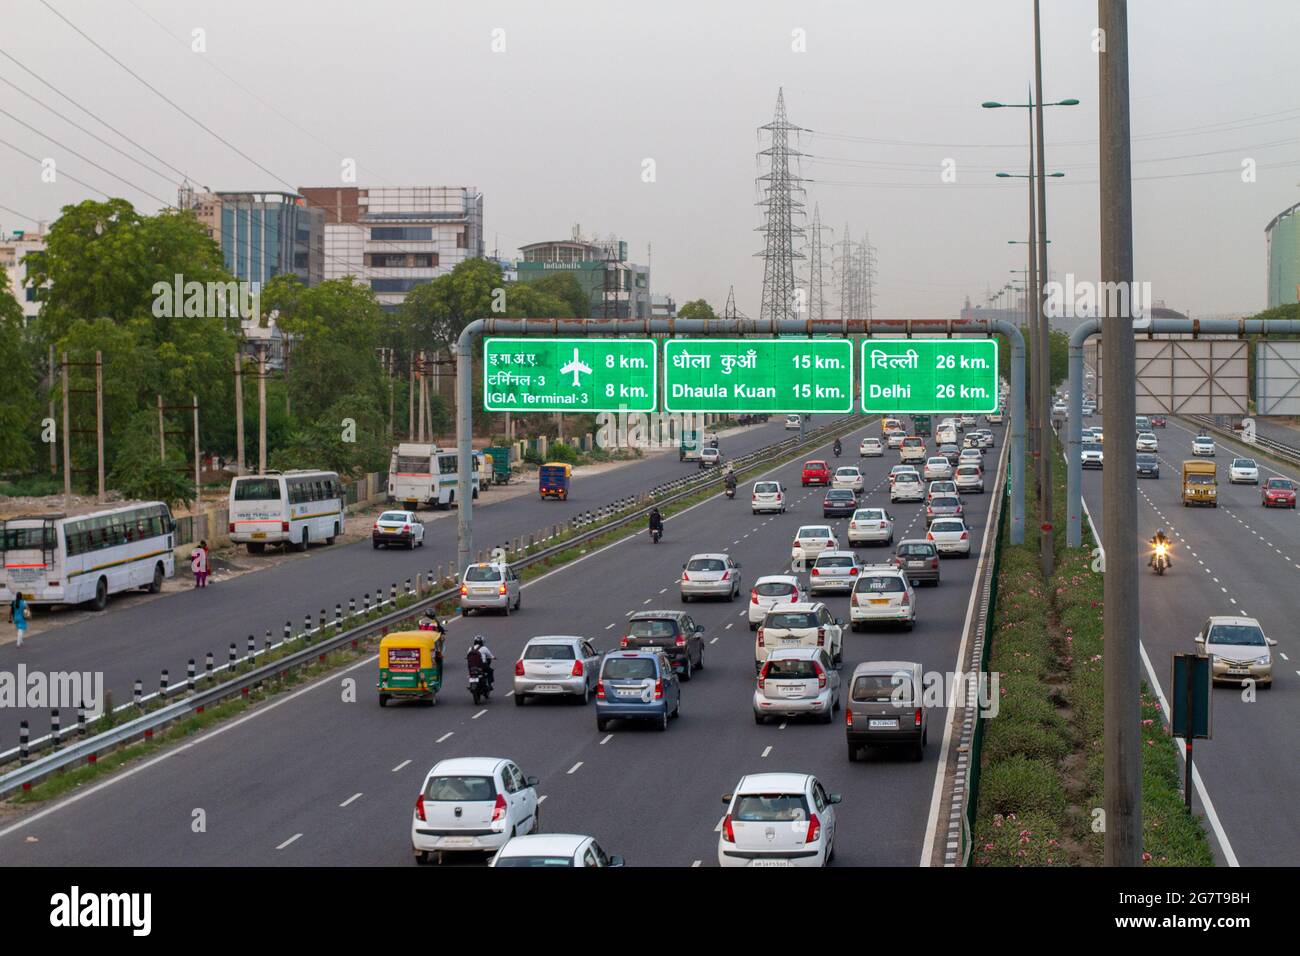 GURGAON, INDIA - Jan 01, 2016: The National Highway 8 or NH8 in the Indian subcontinent Stock Photo